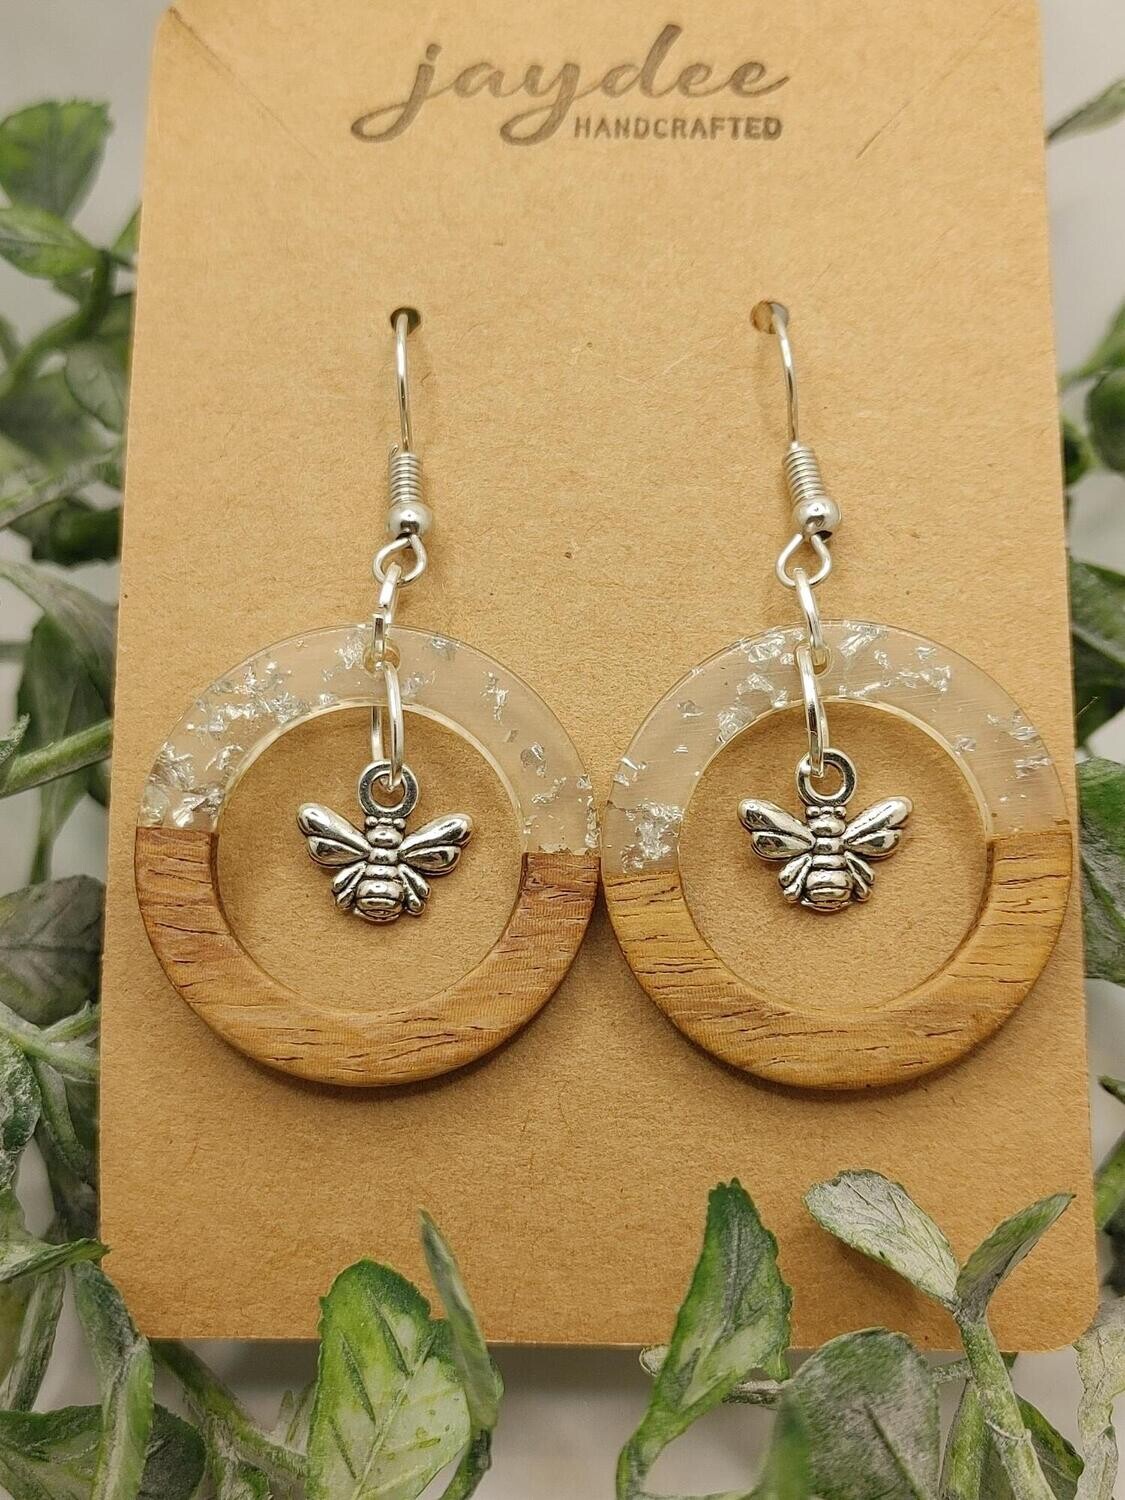 Earrings: White Resin/Wood with Bee Charm